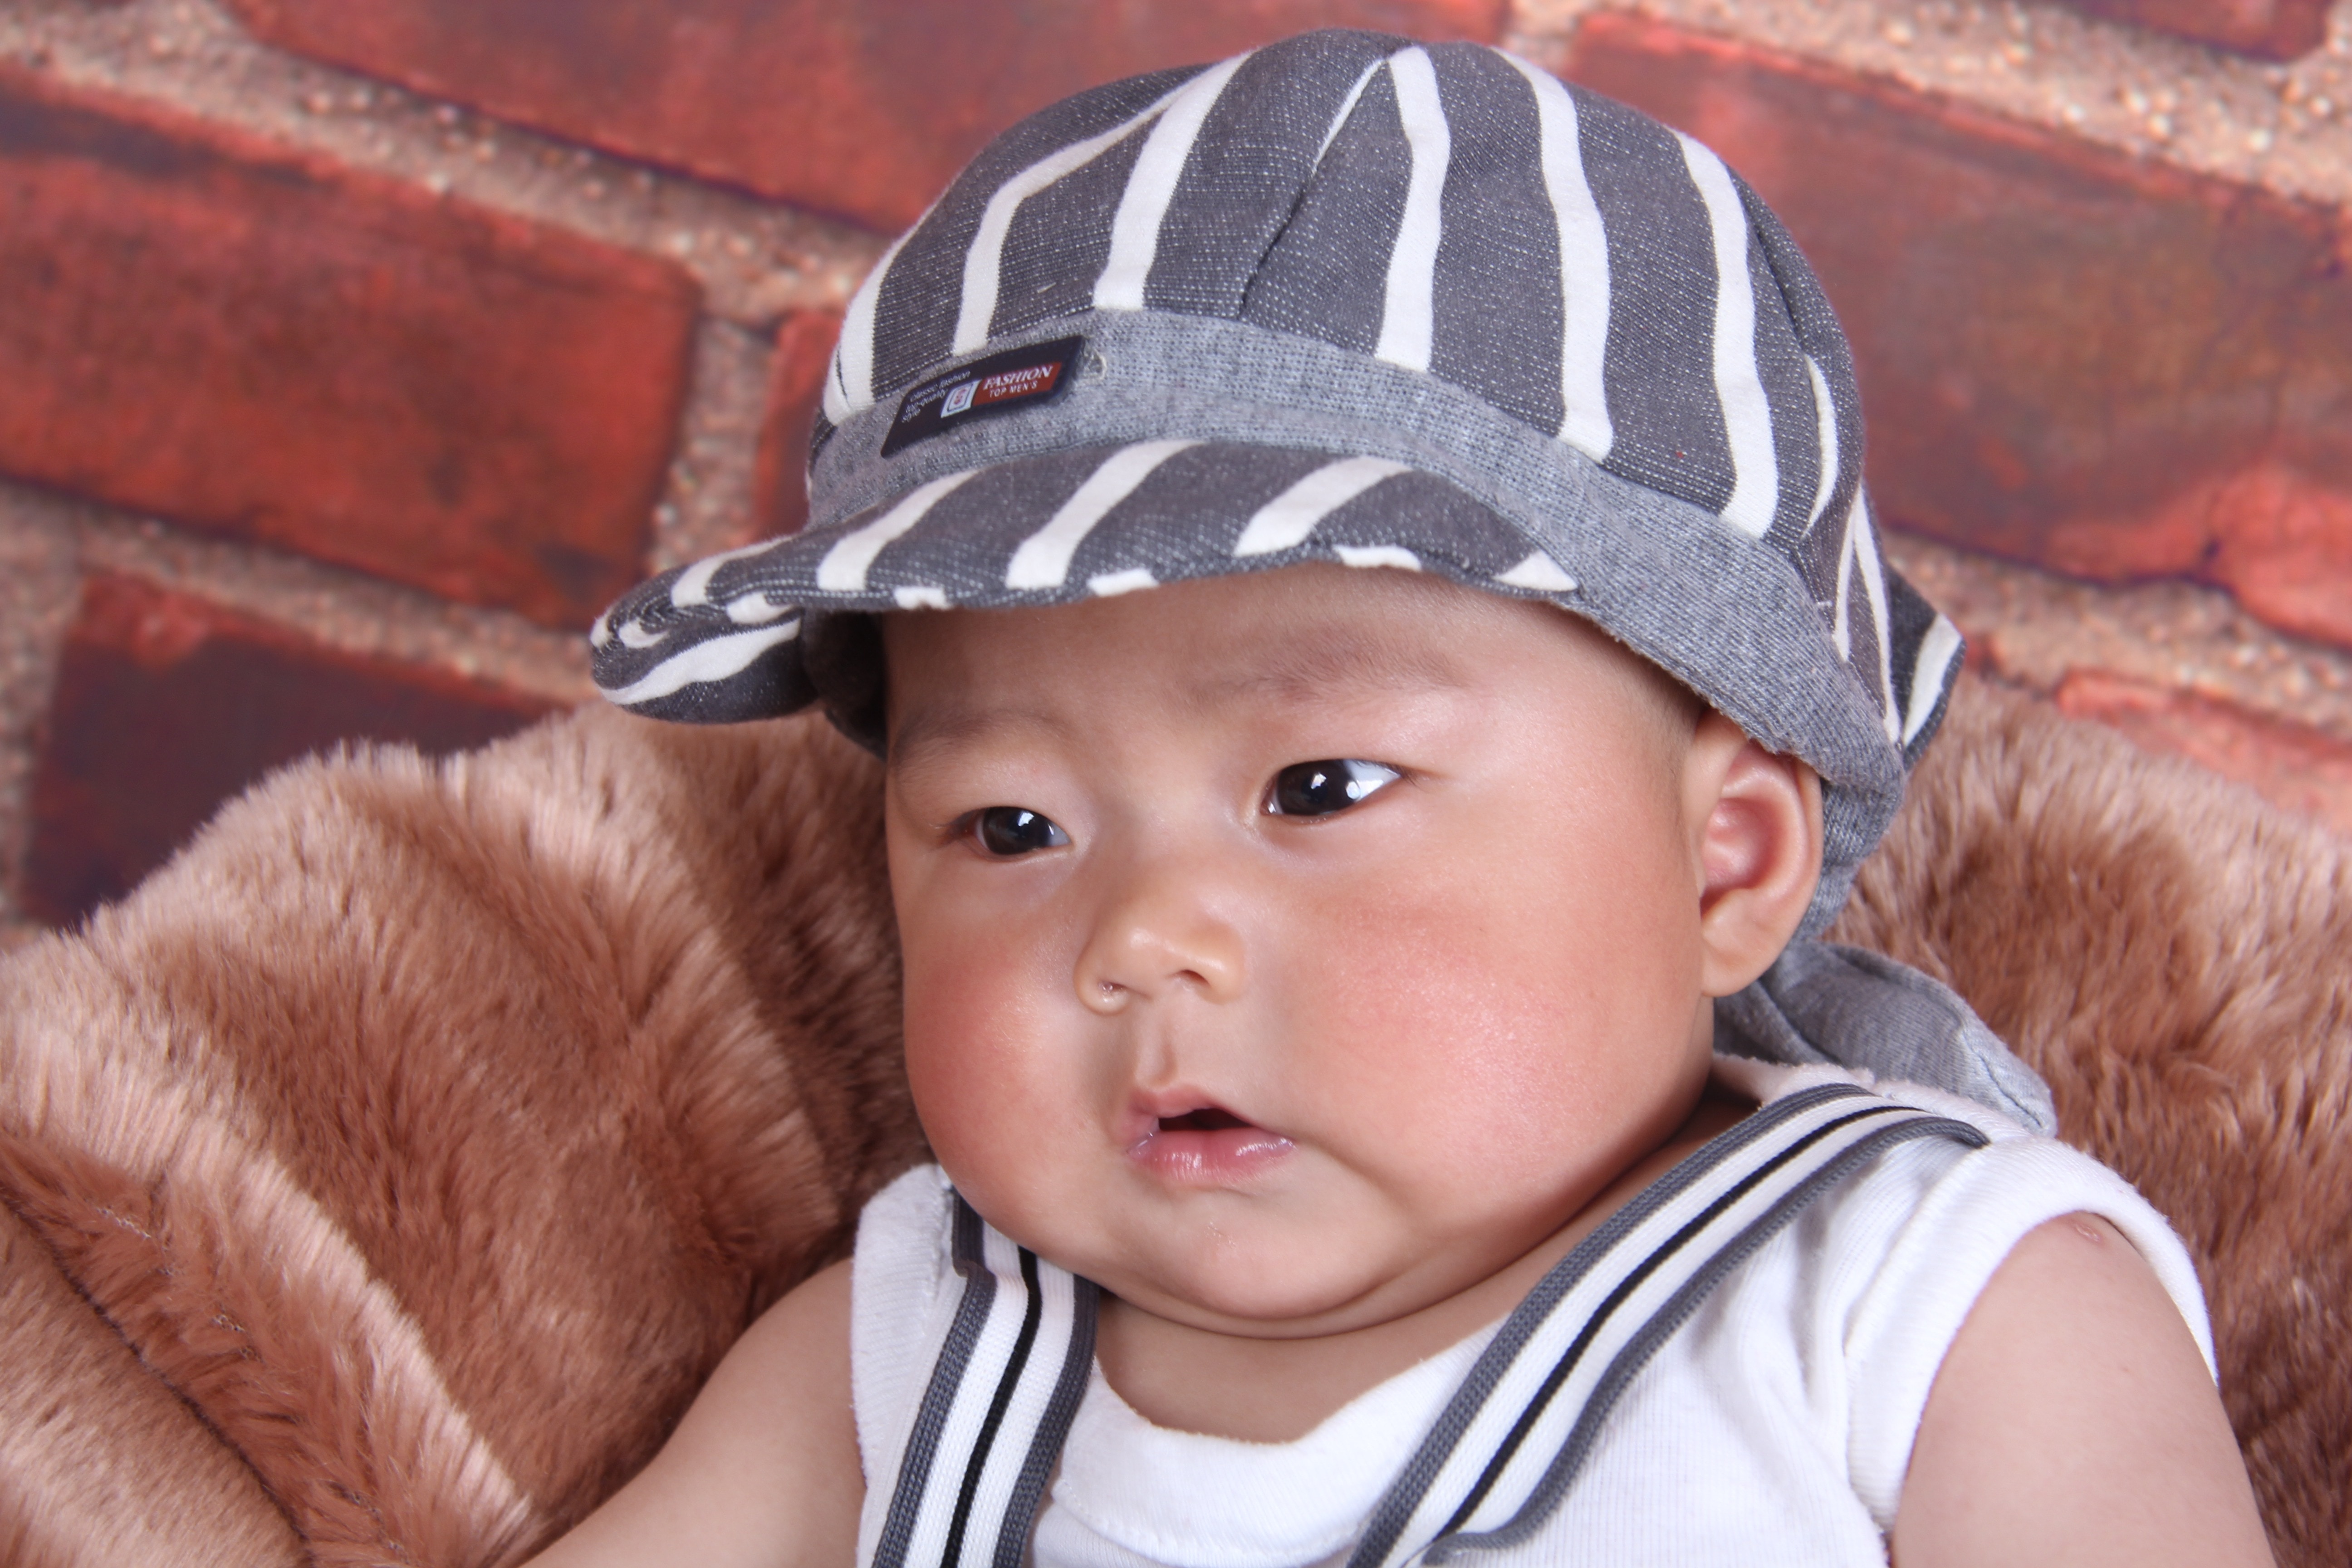 baby boy in white tank top and gray hat sitting on chair